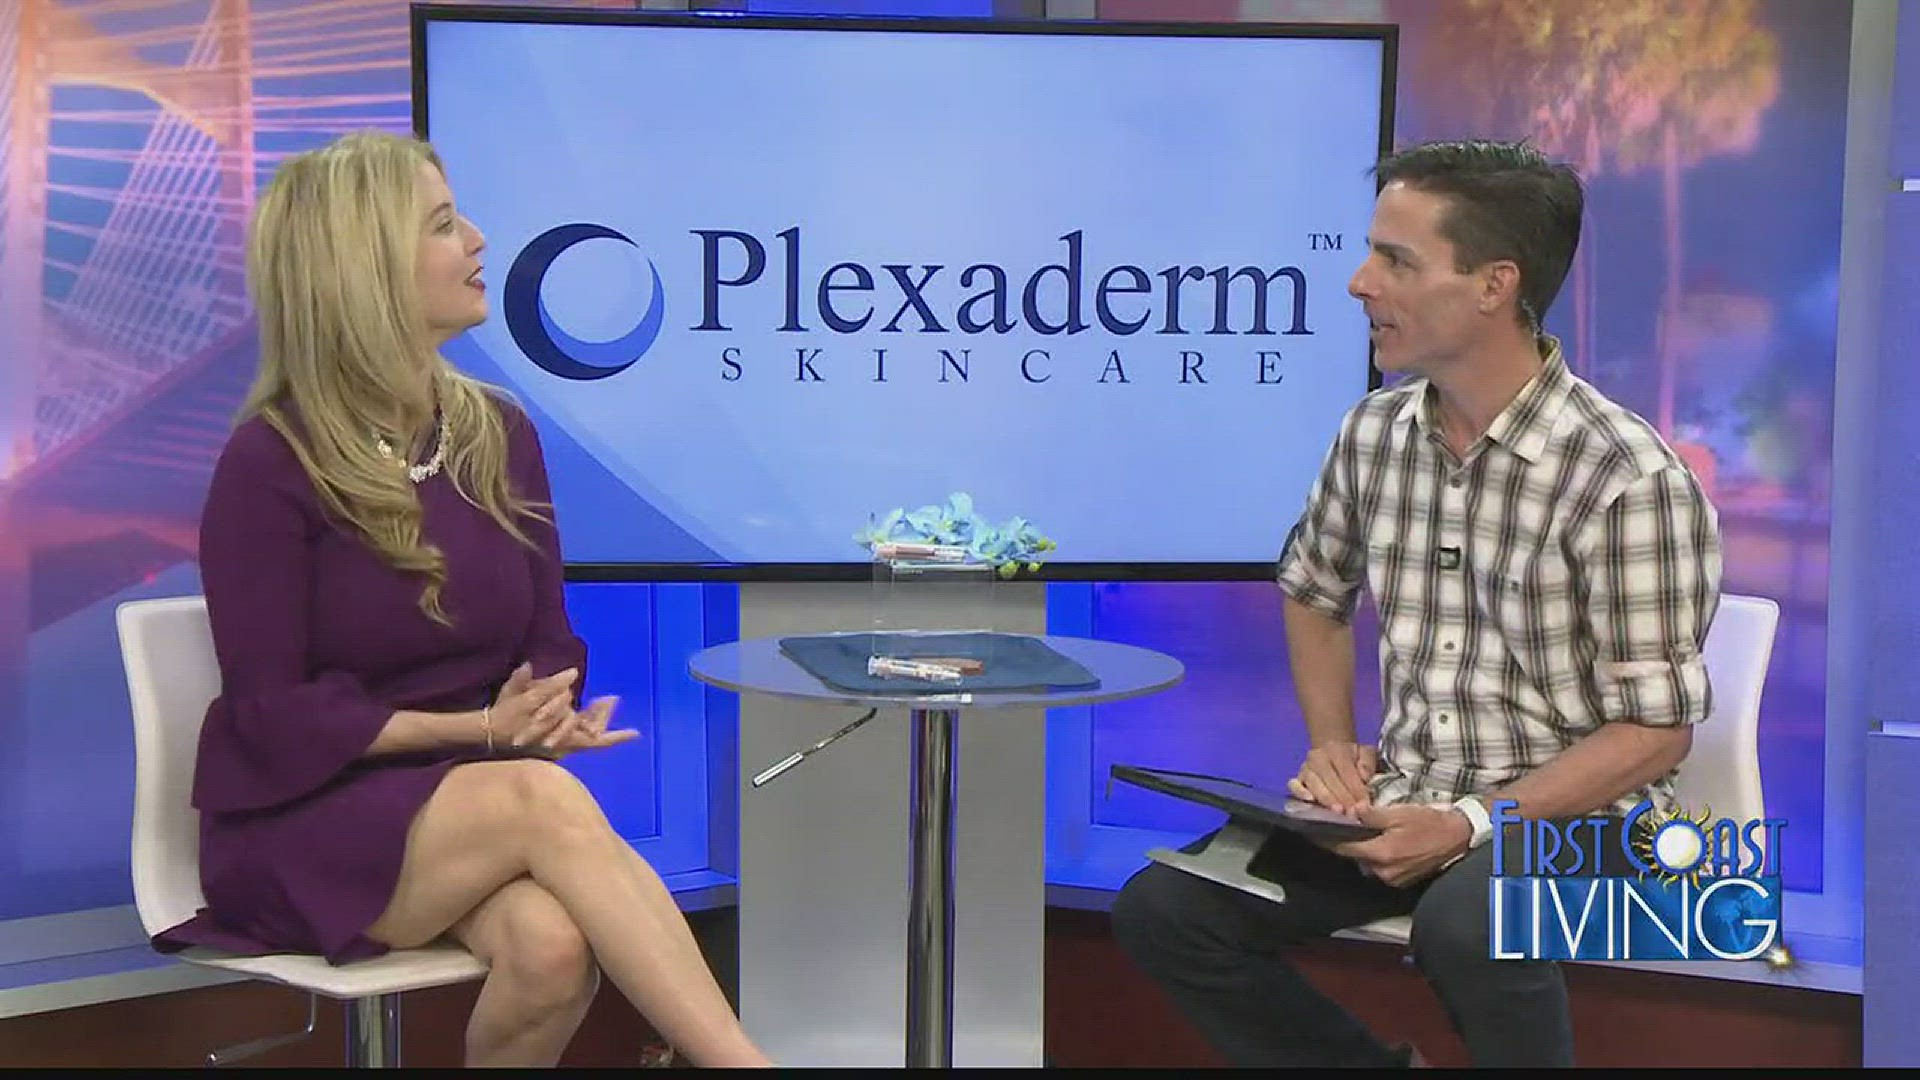 Plexaderm can help you look younger in just minutes.